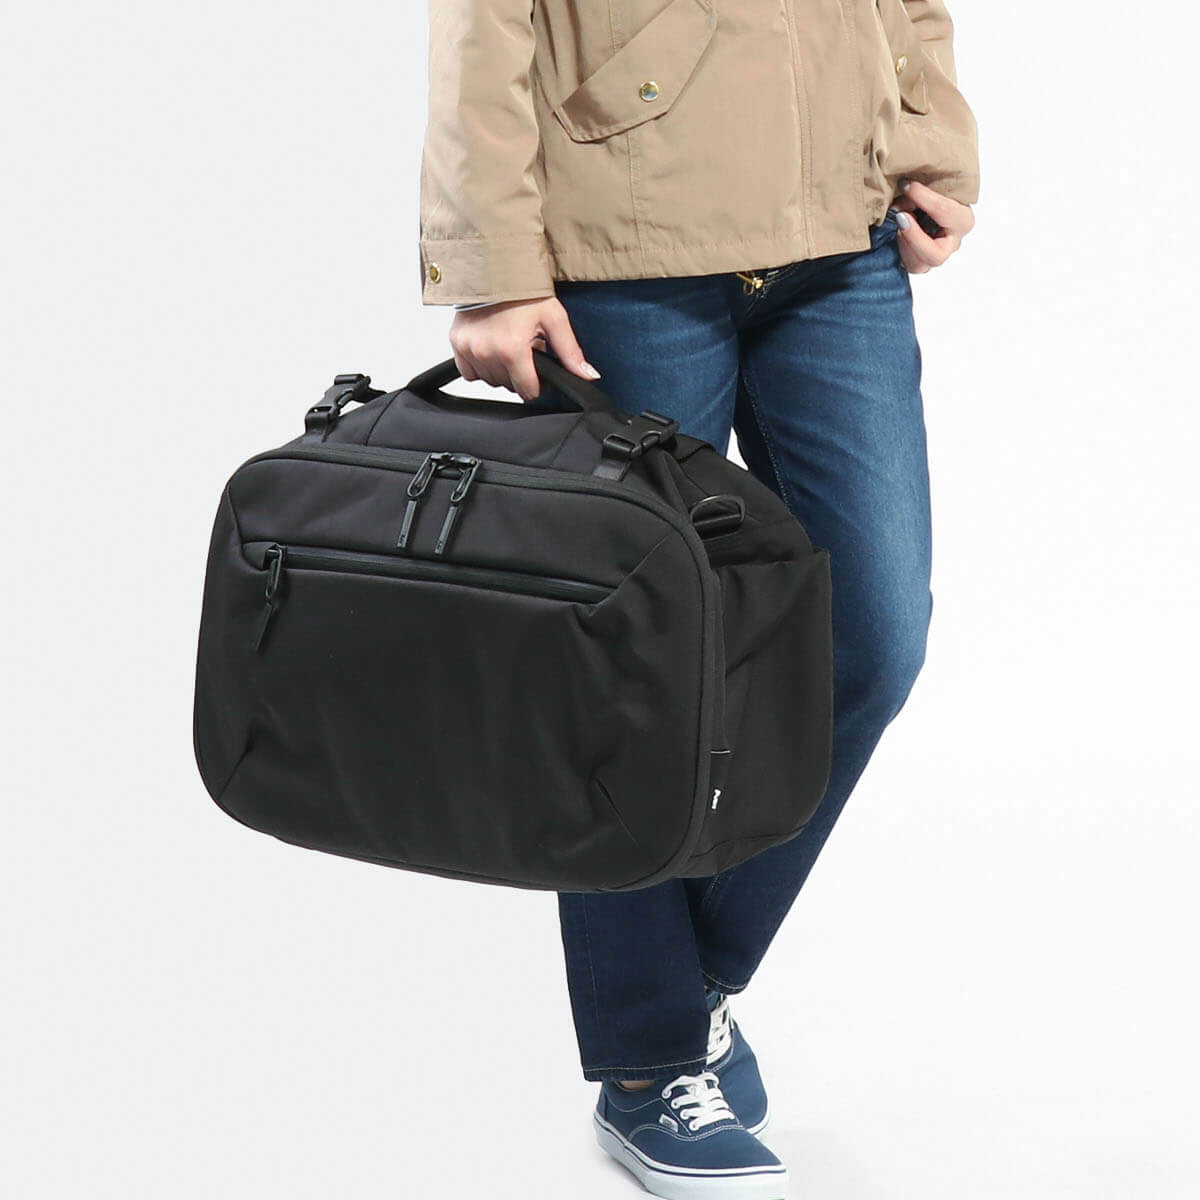 Aer エアー All-New Travel Collection Travel Duffel 2WAYボストン 